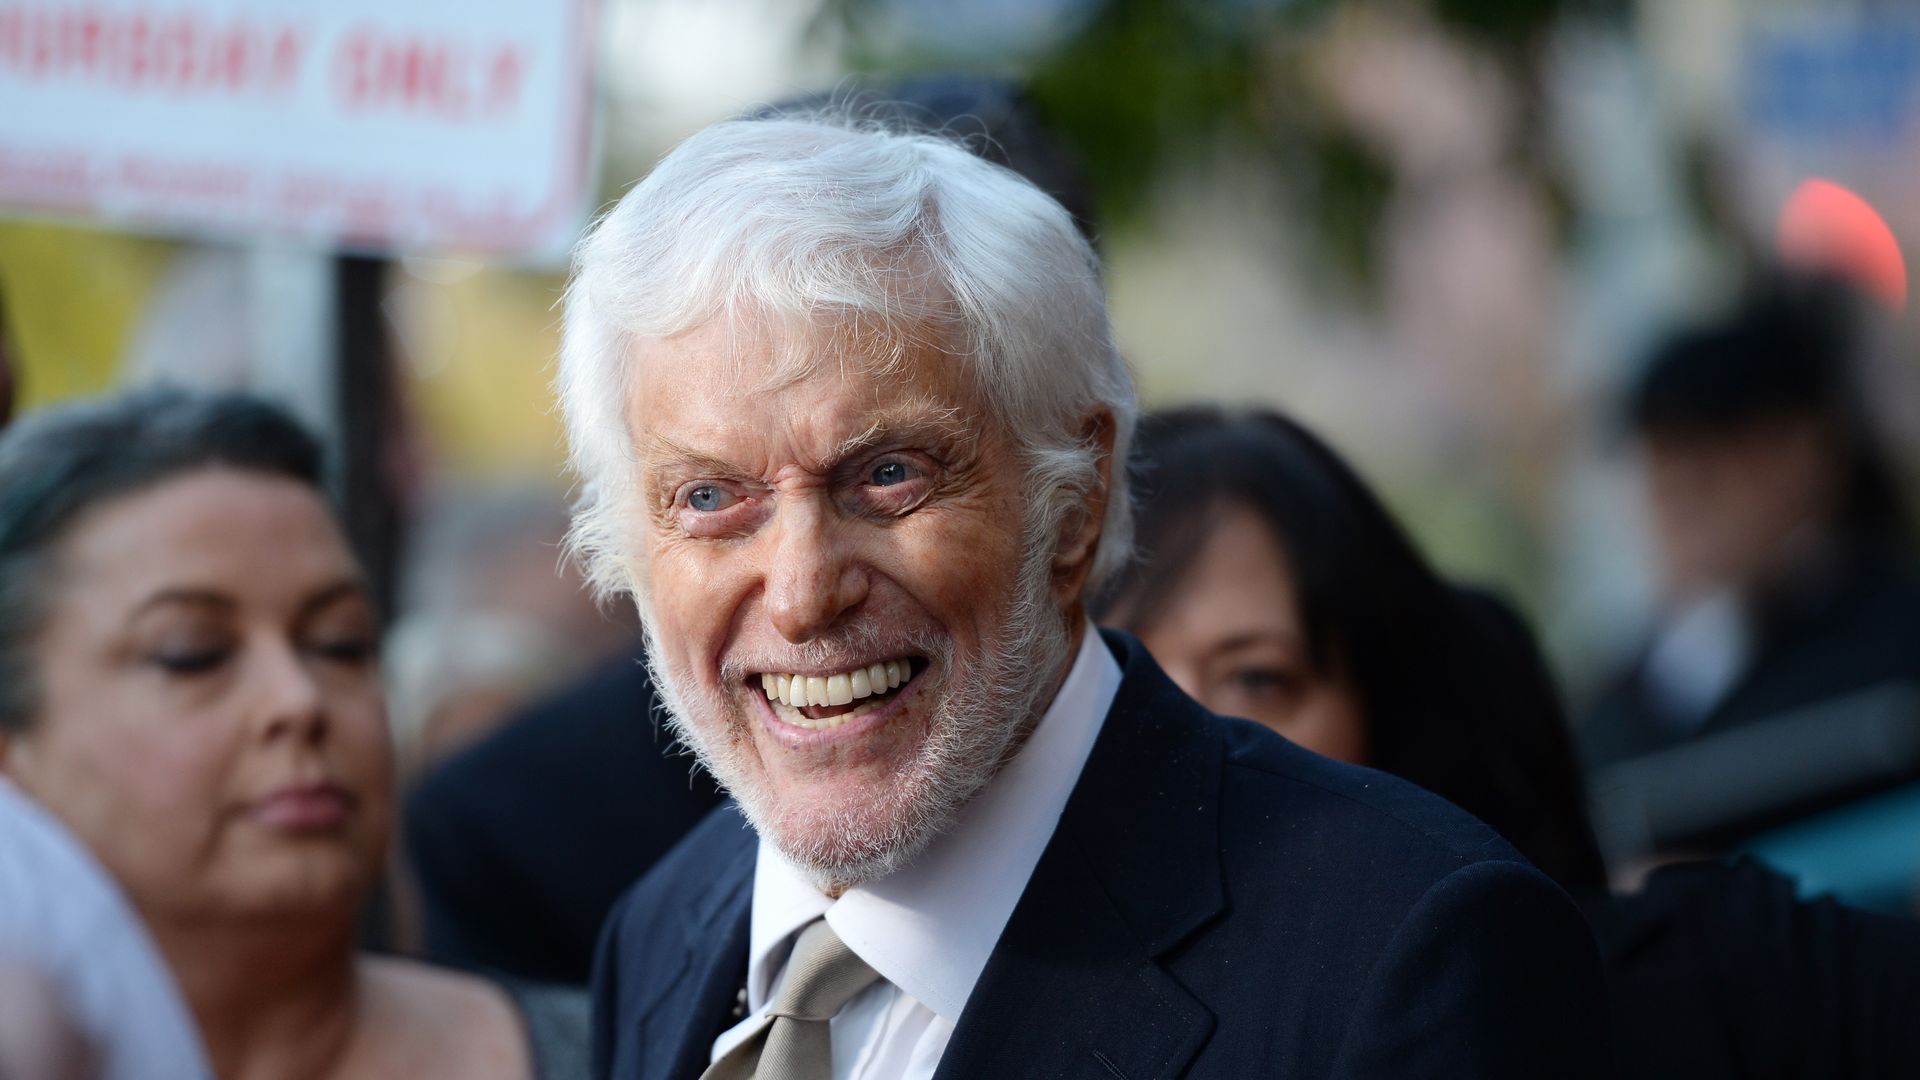 Dick Van Dyke at 98 is as energetic as ever just days after making history – see him now